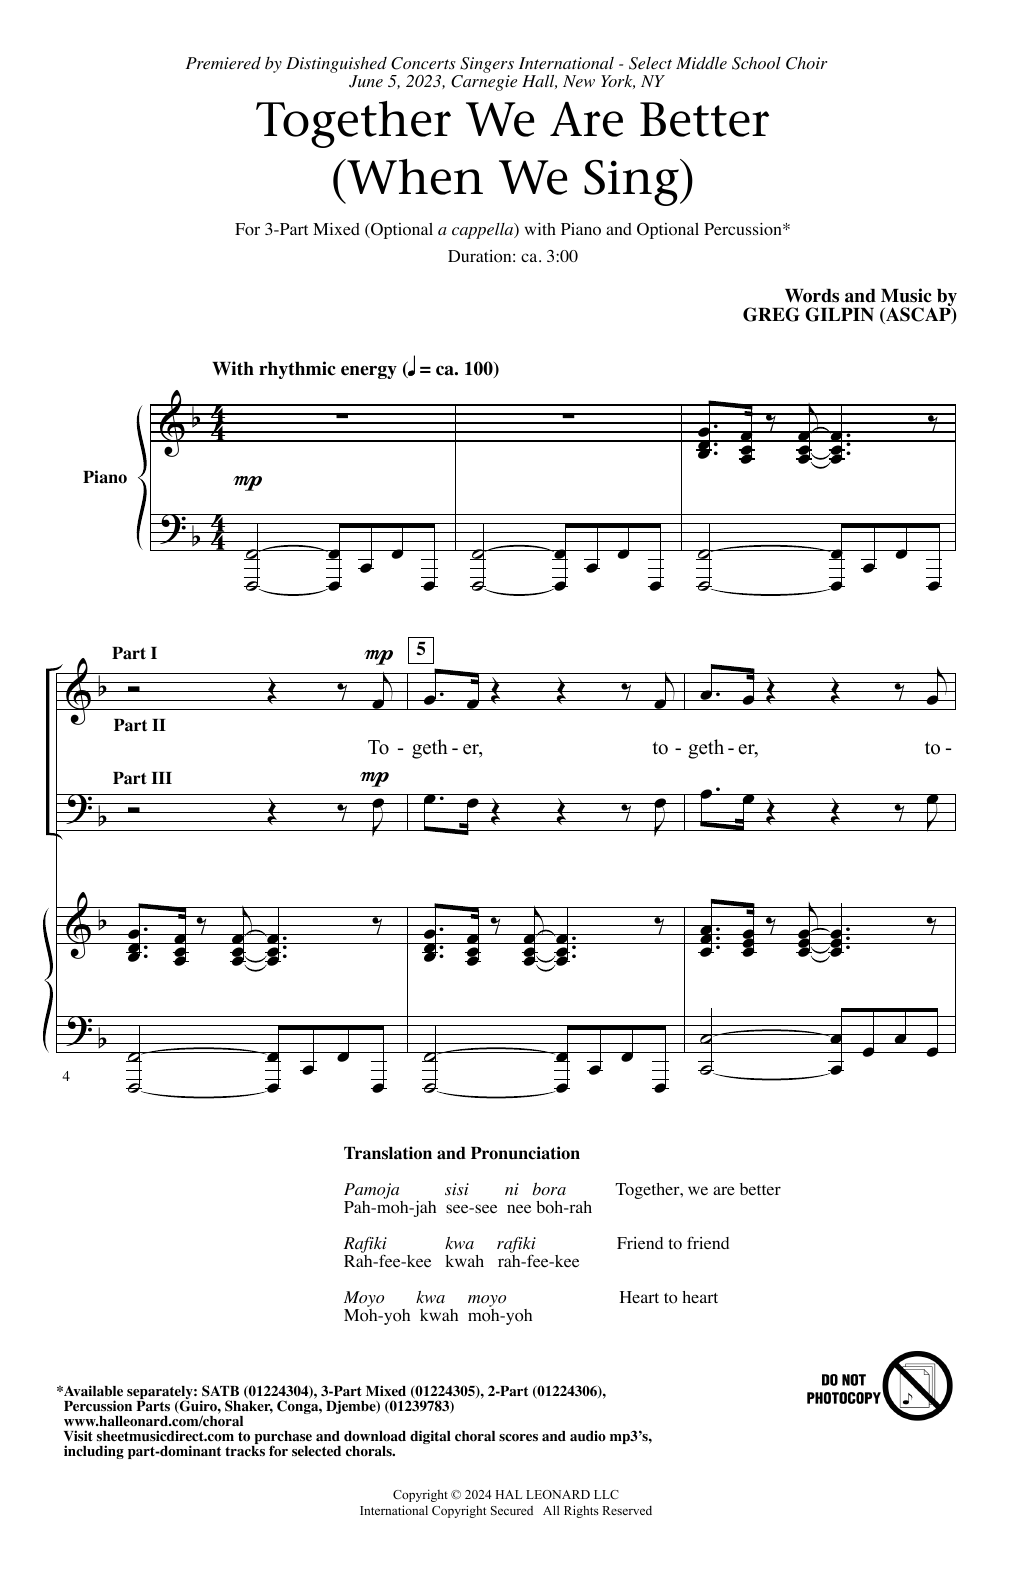 Greg Gilpin Together We Are Better (When We Sing) sheet music notes printable PDF score